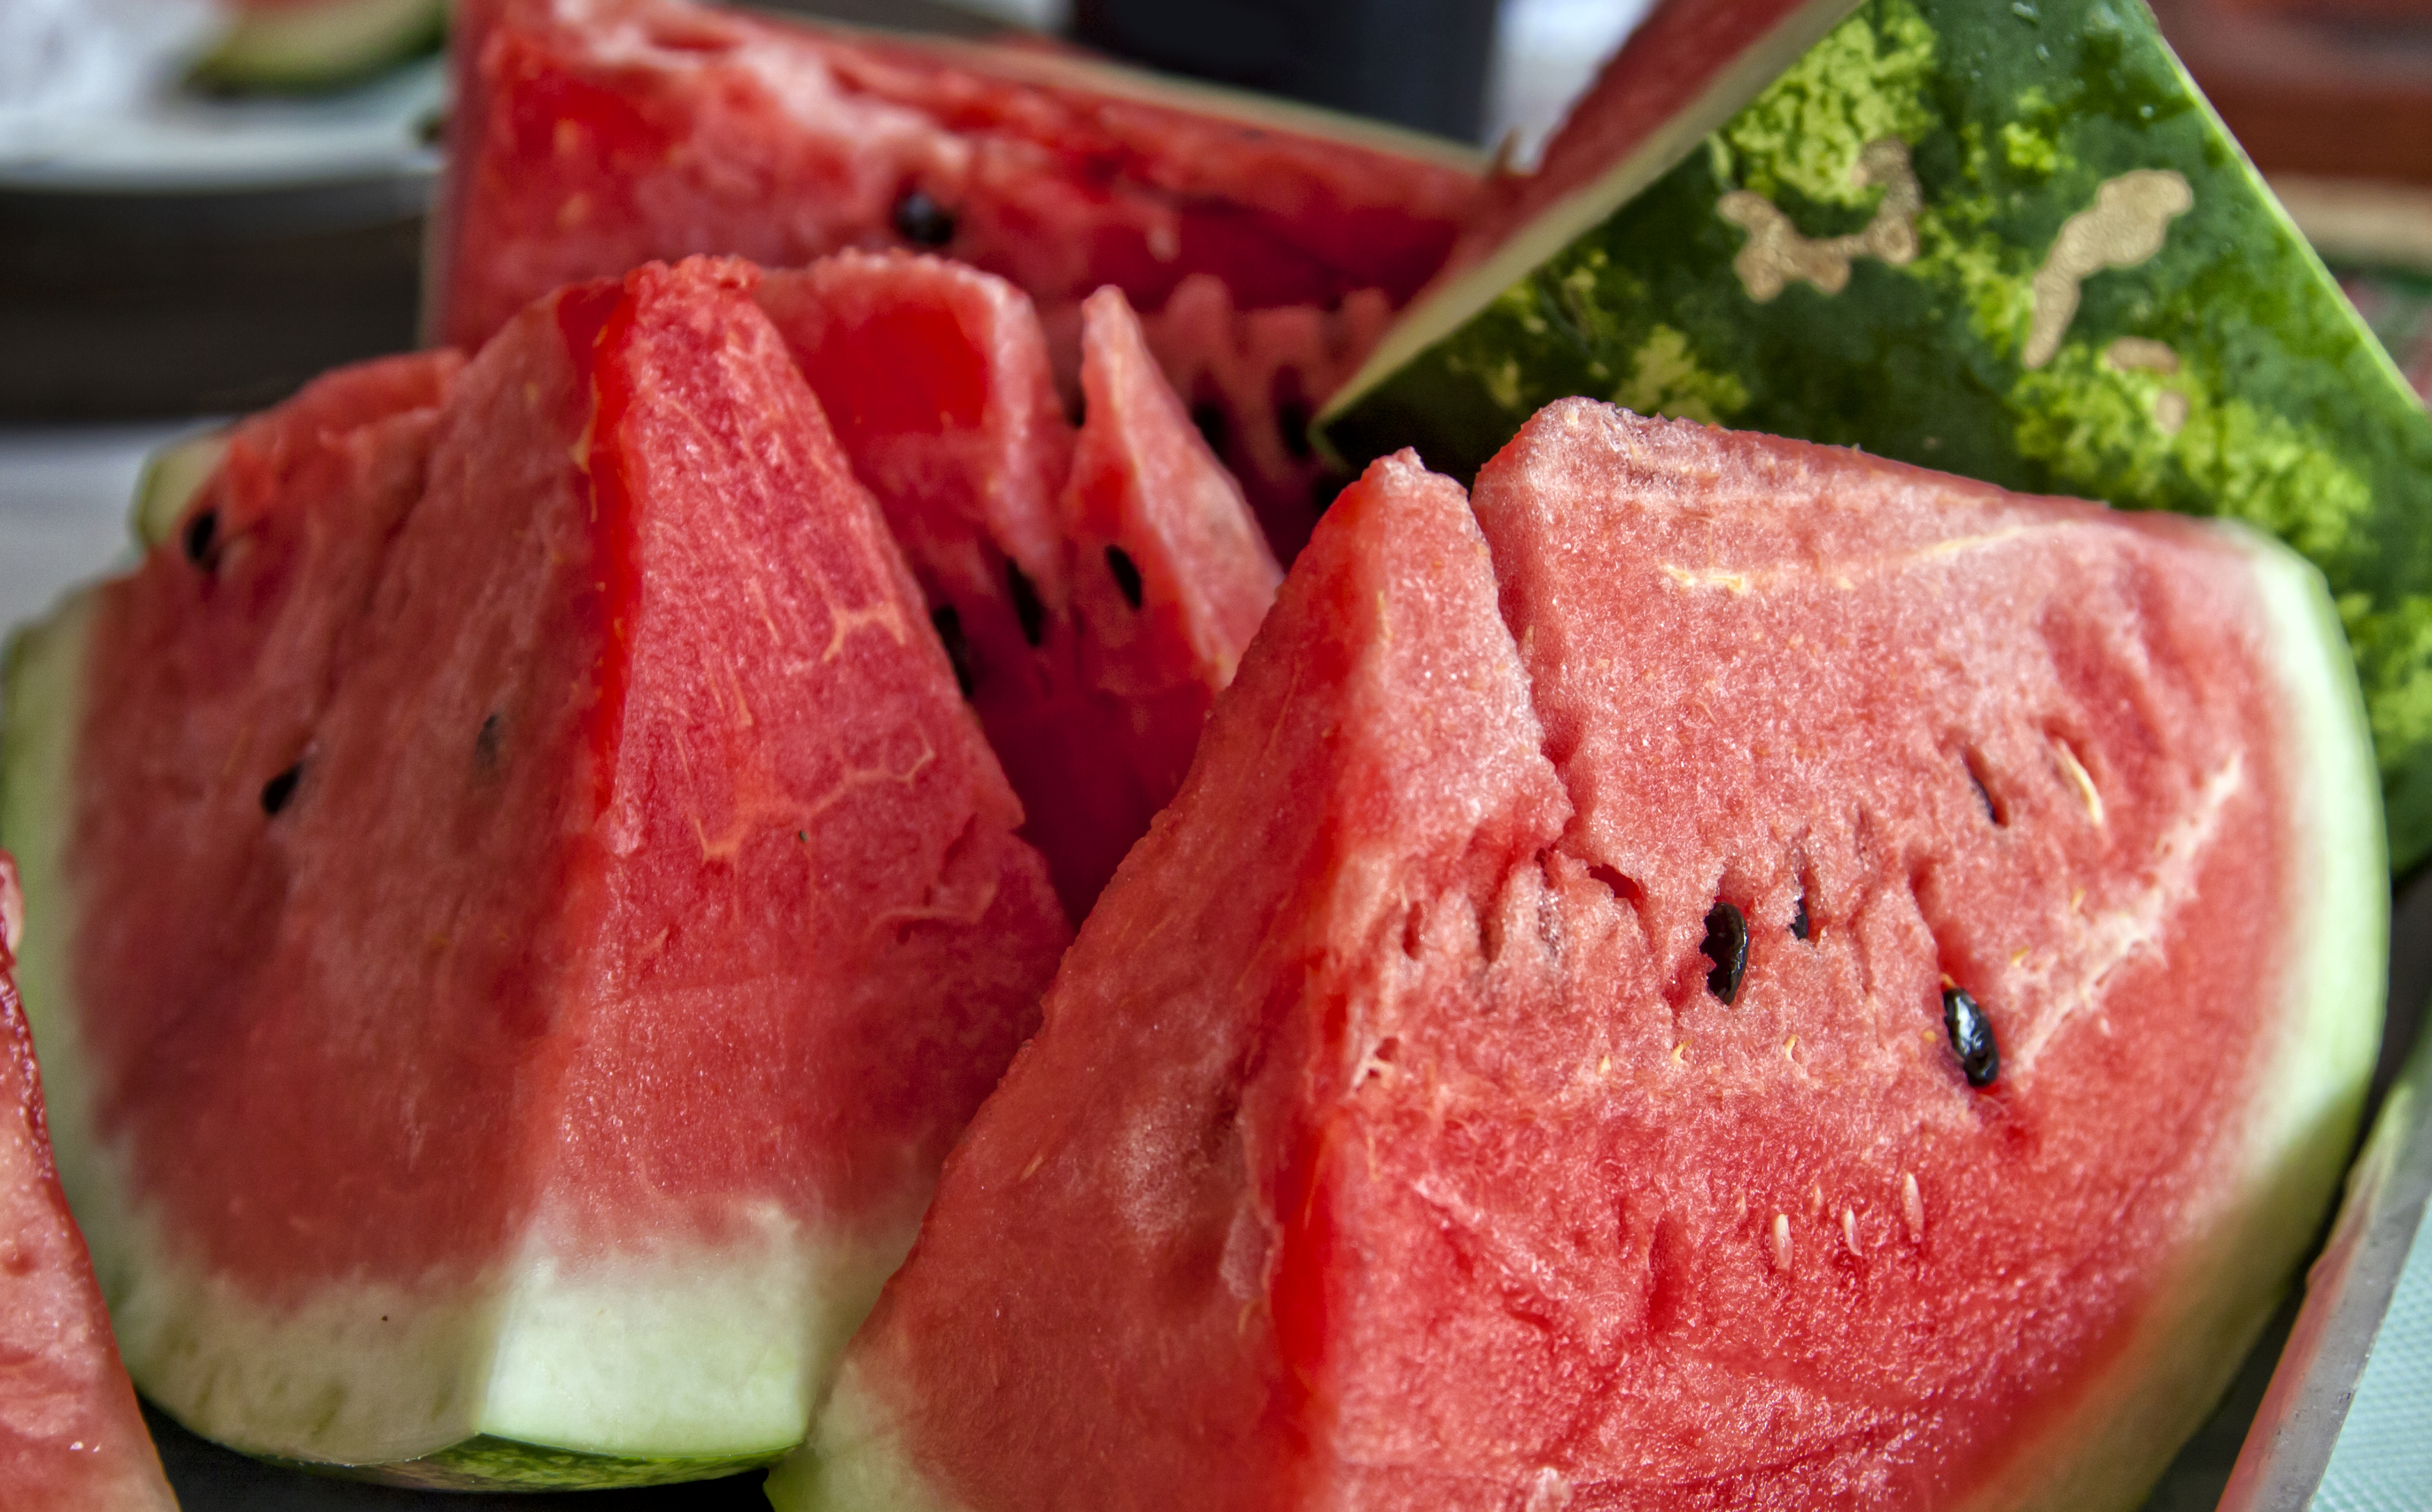 People are reporting that their watermelons are exploding. Here's why
it happens